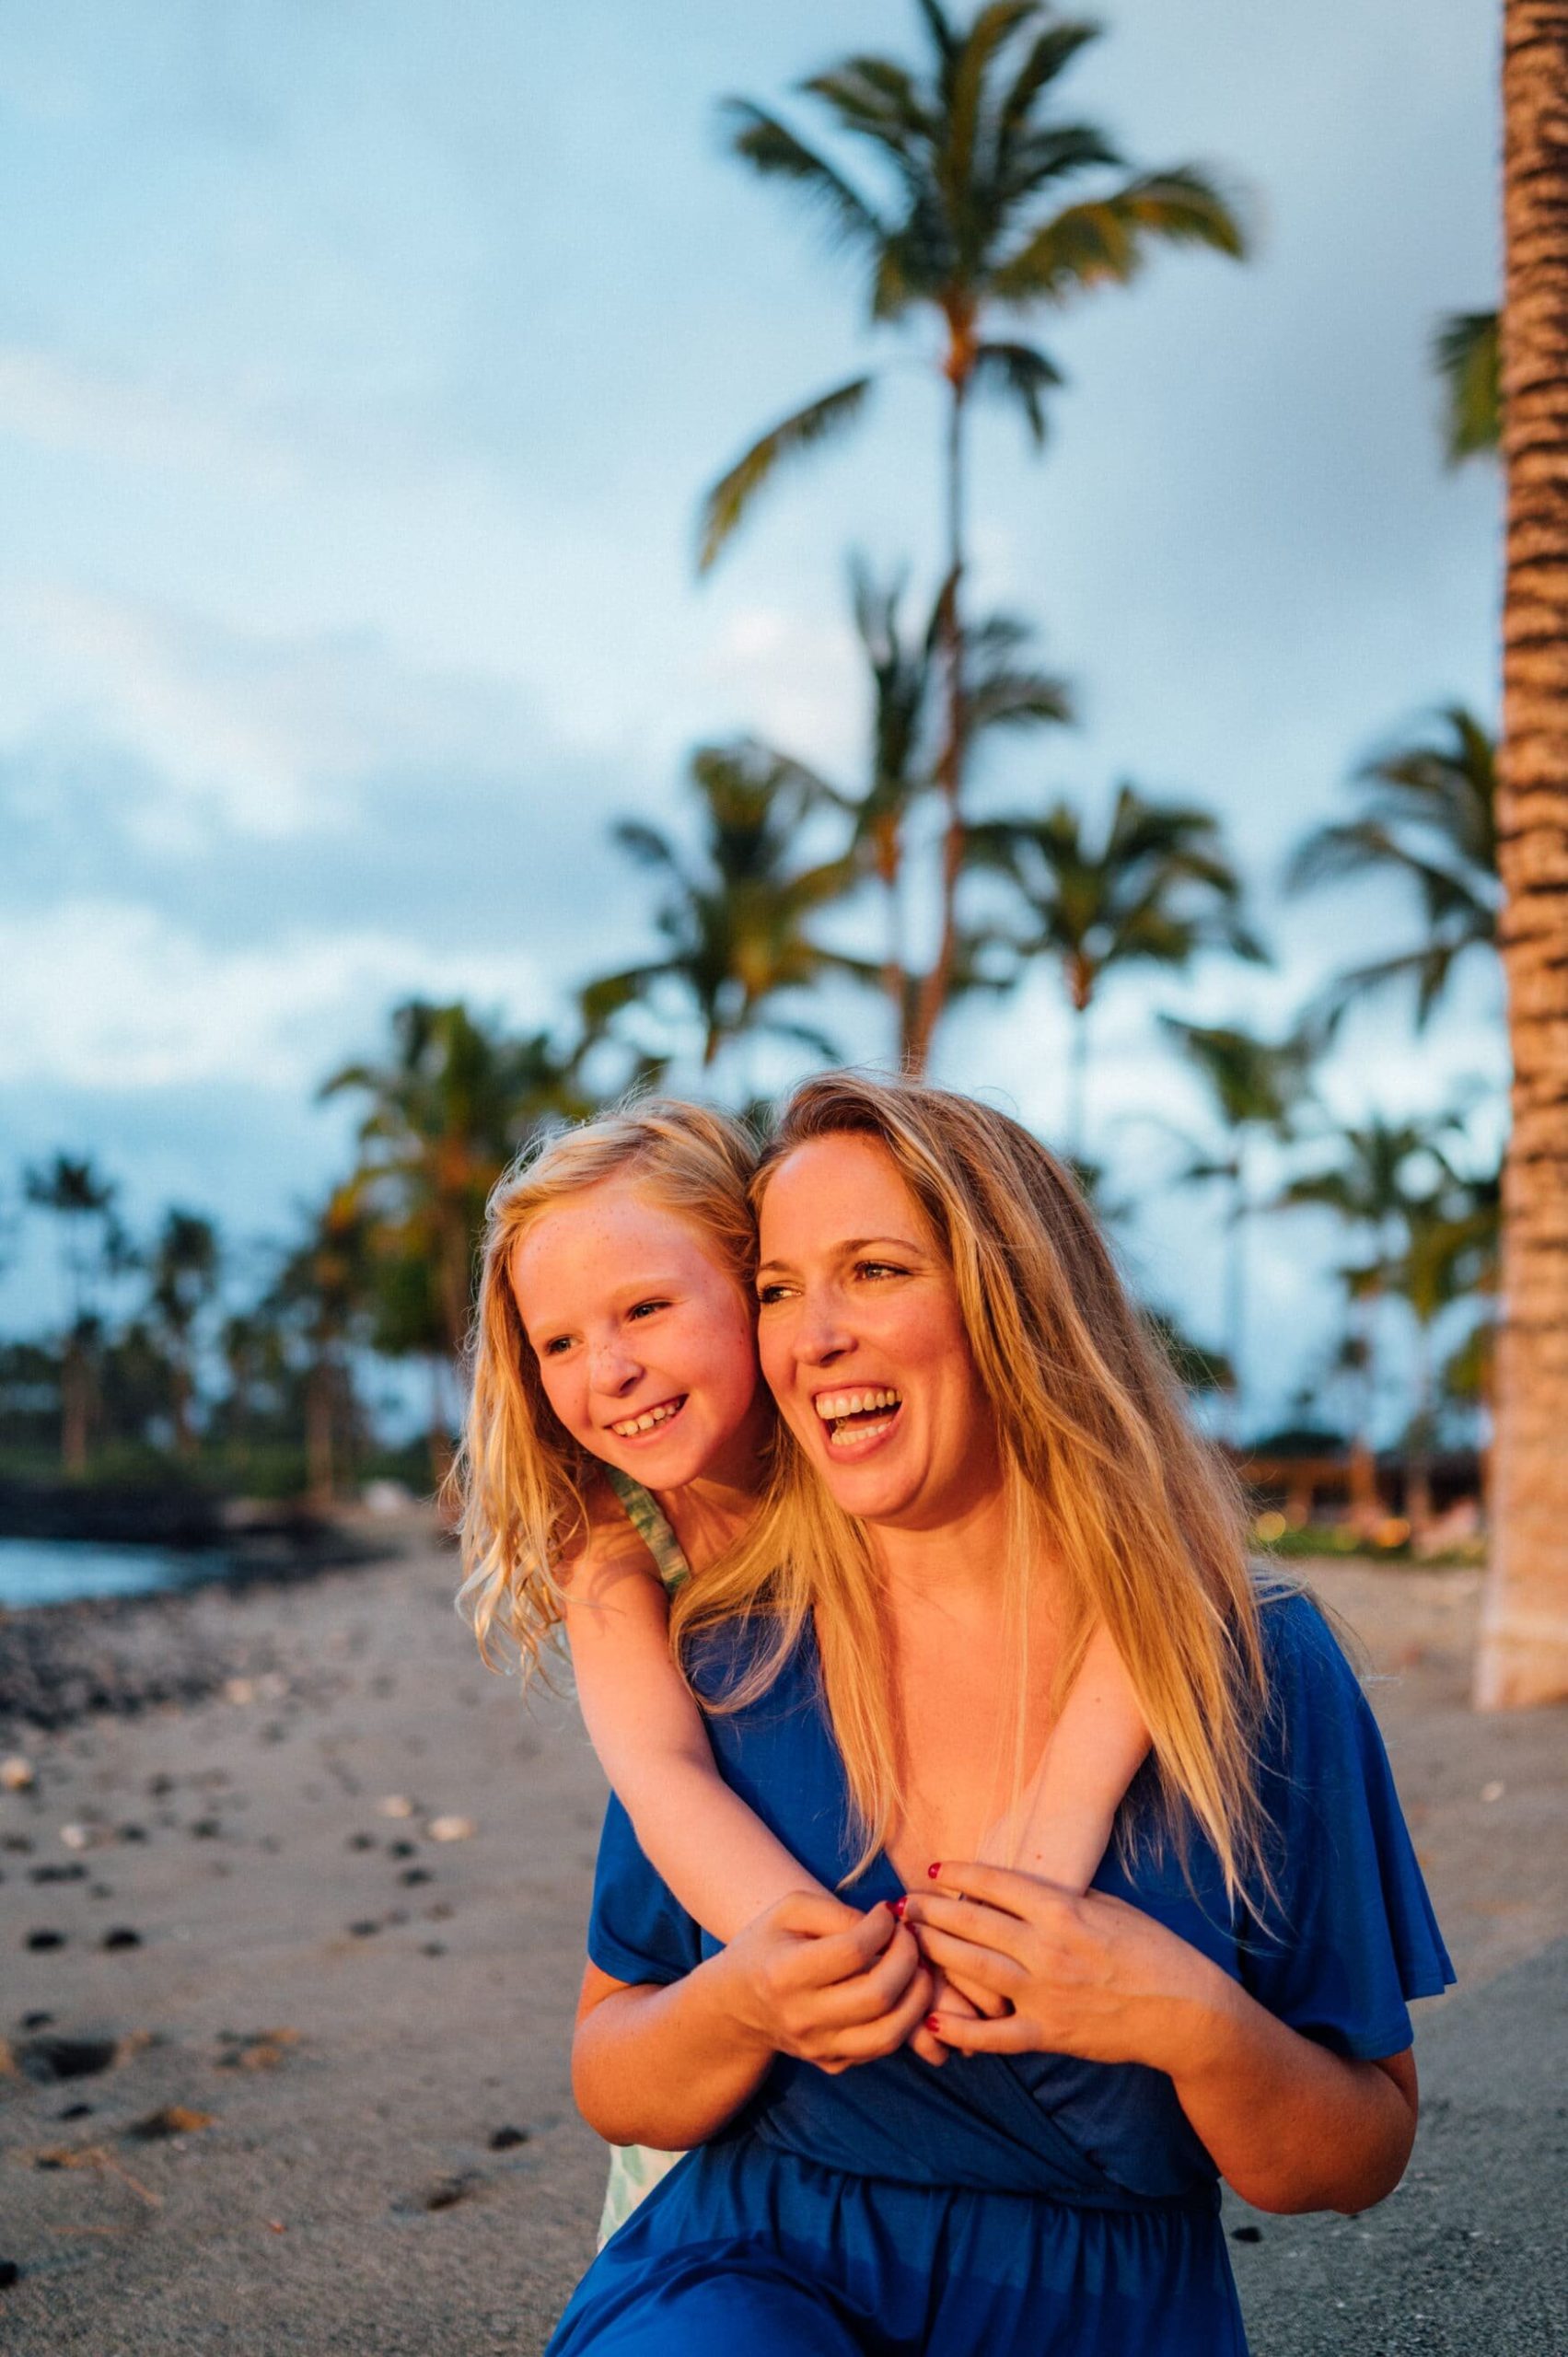 mother-daughter-photo-session-beach-21.jpg